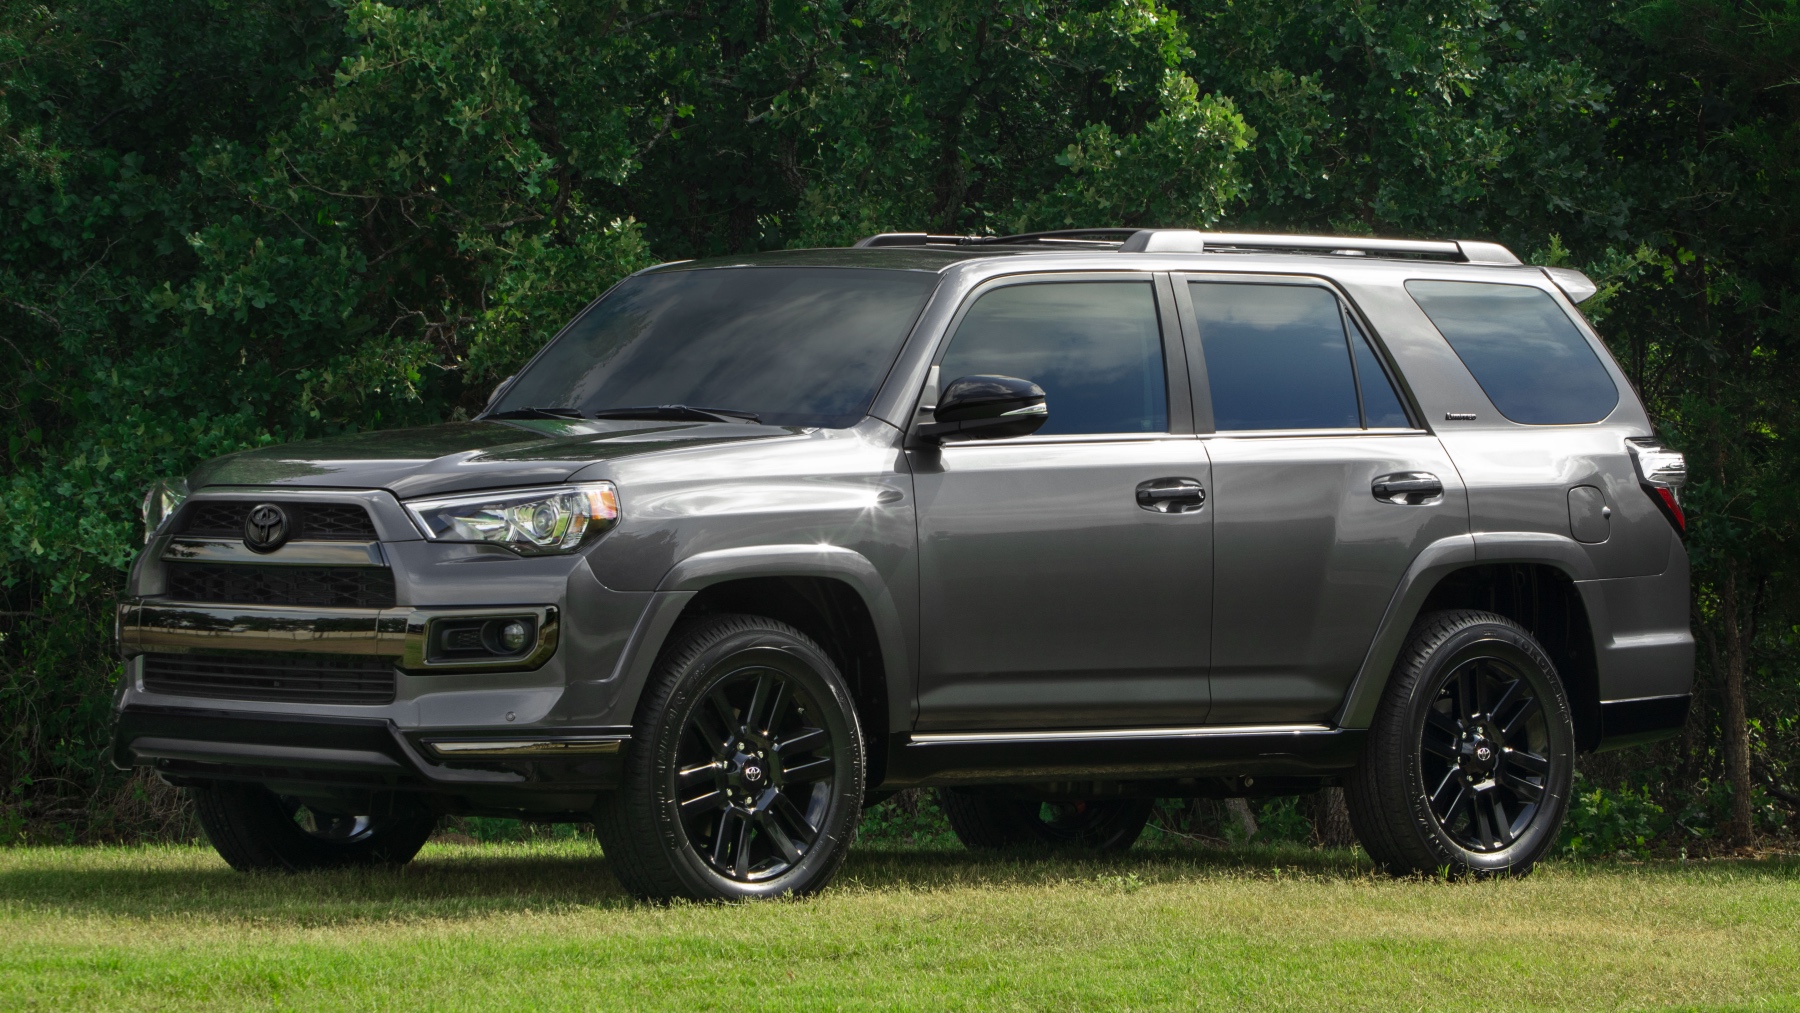 Toyota S Going Dark With The 2019 4runner Nightshade Edition News